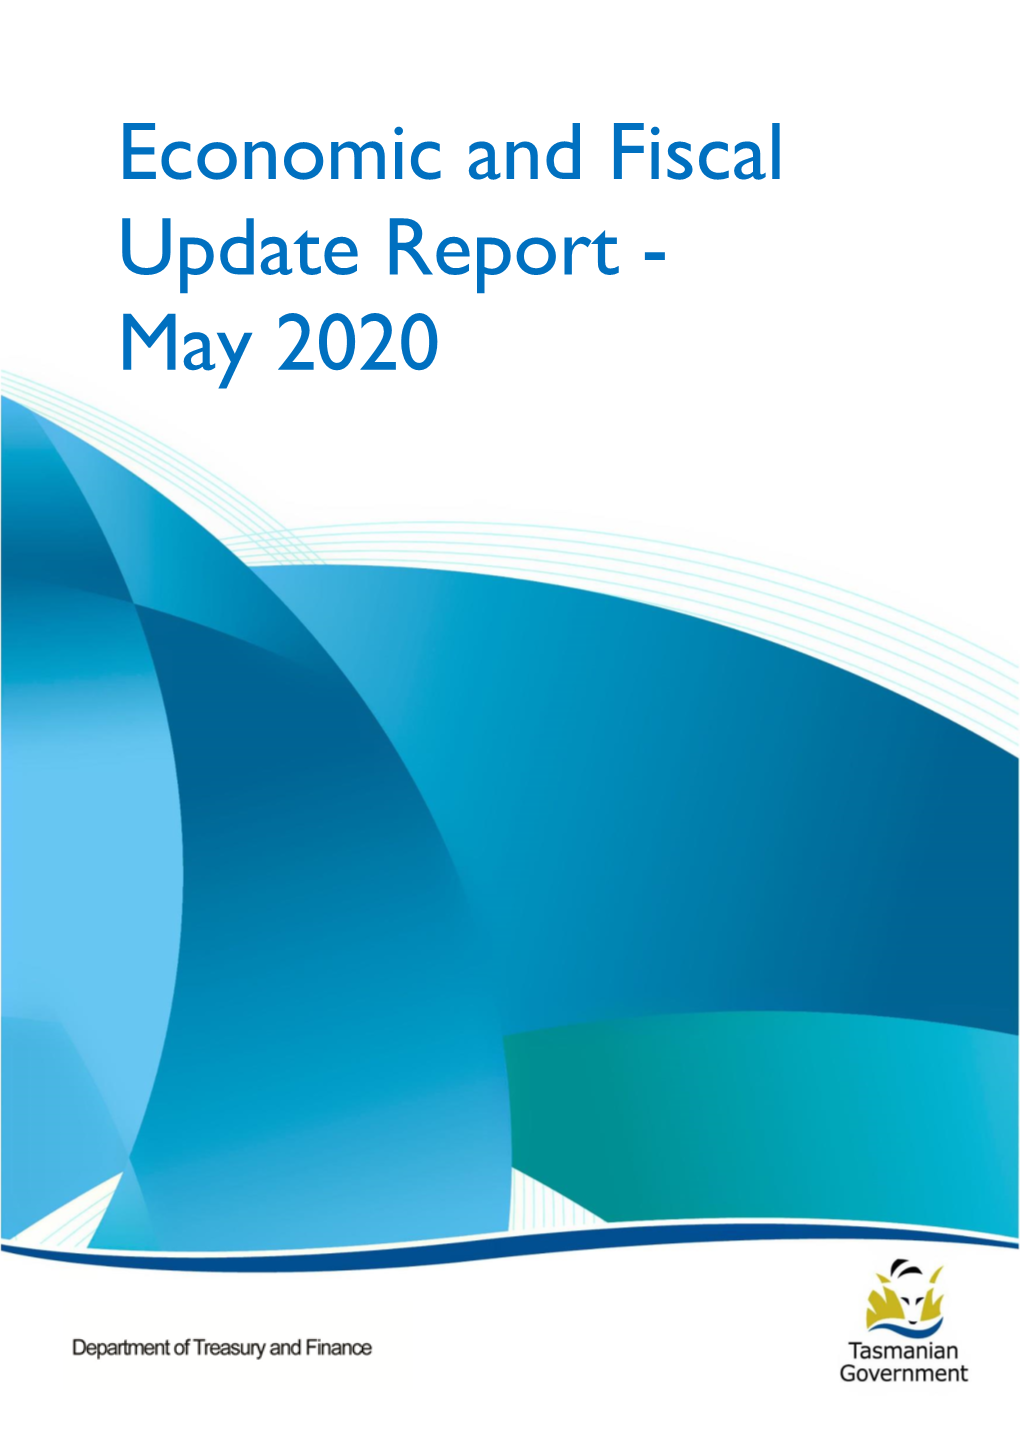 Economic and Fiscal Update Report - May 2020